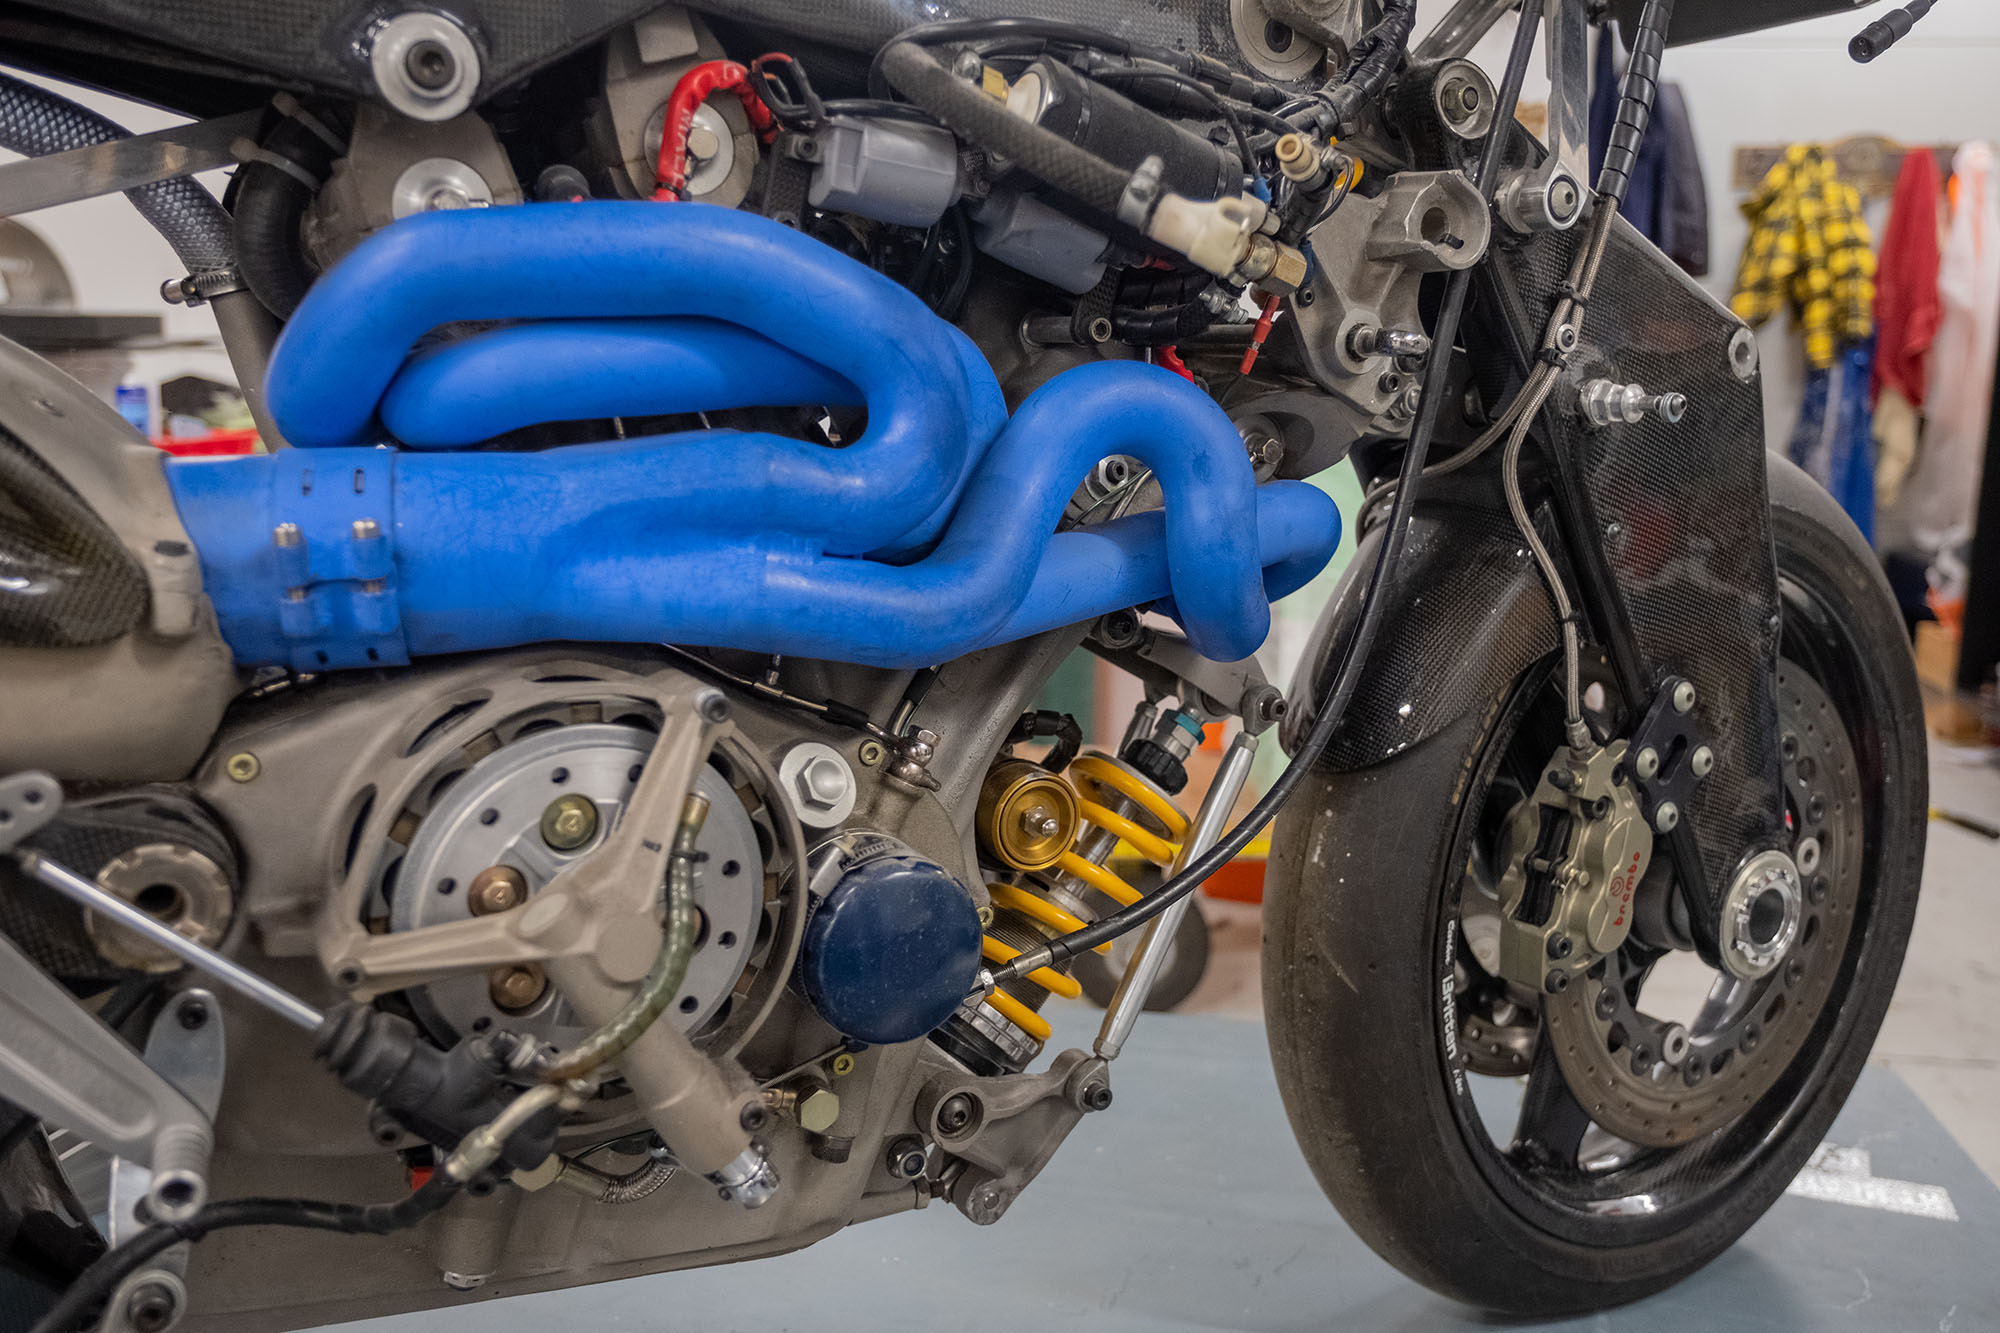 Close up of the bike’s bright blue exhaust system, an organic-looking system of tubes